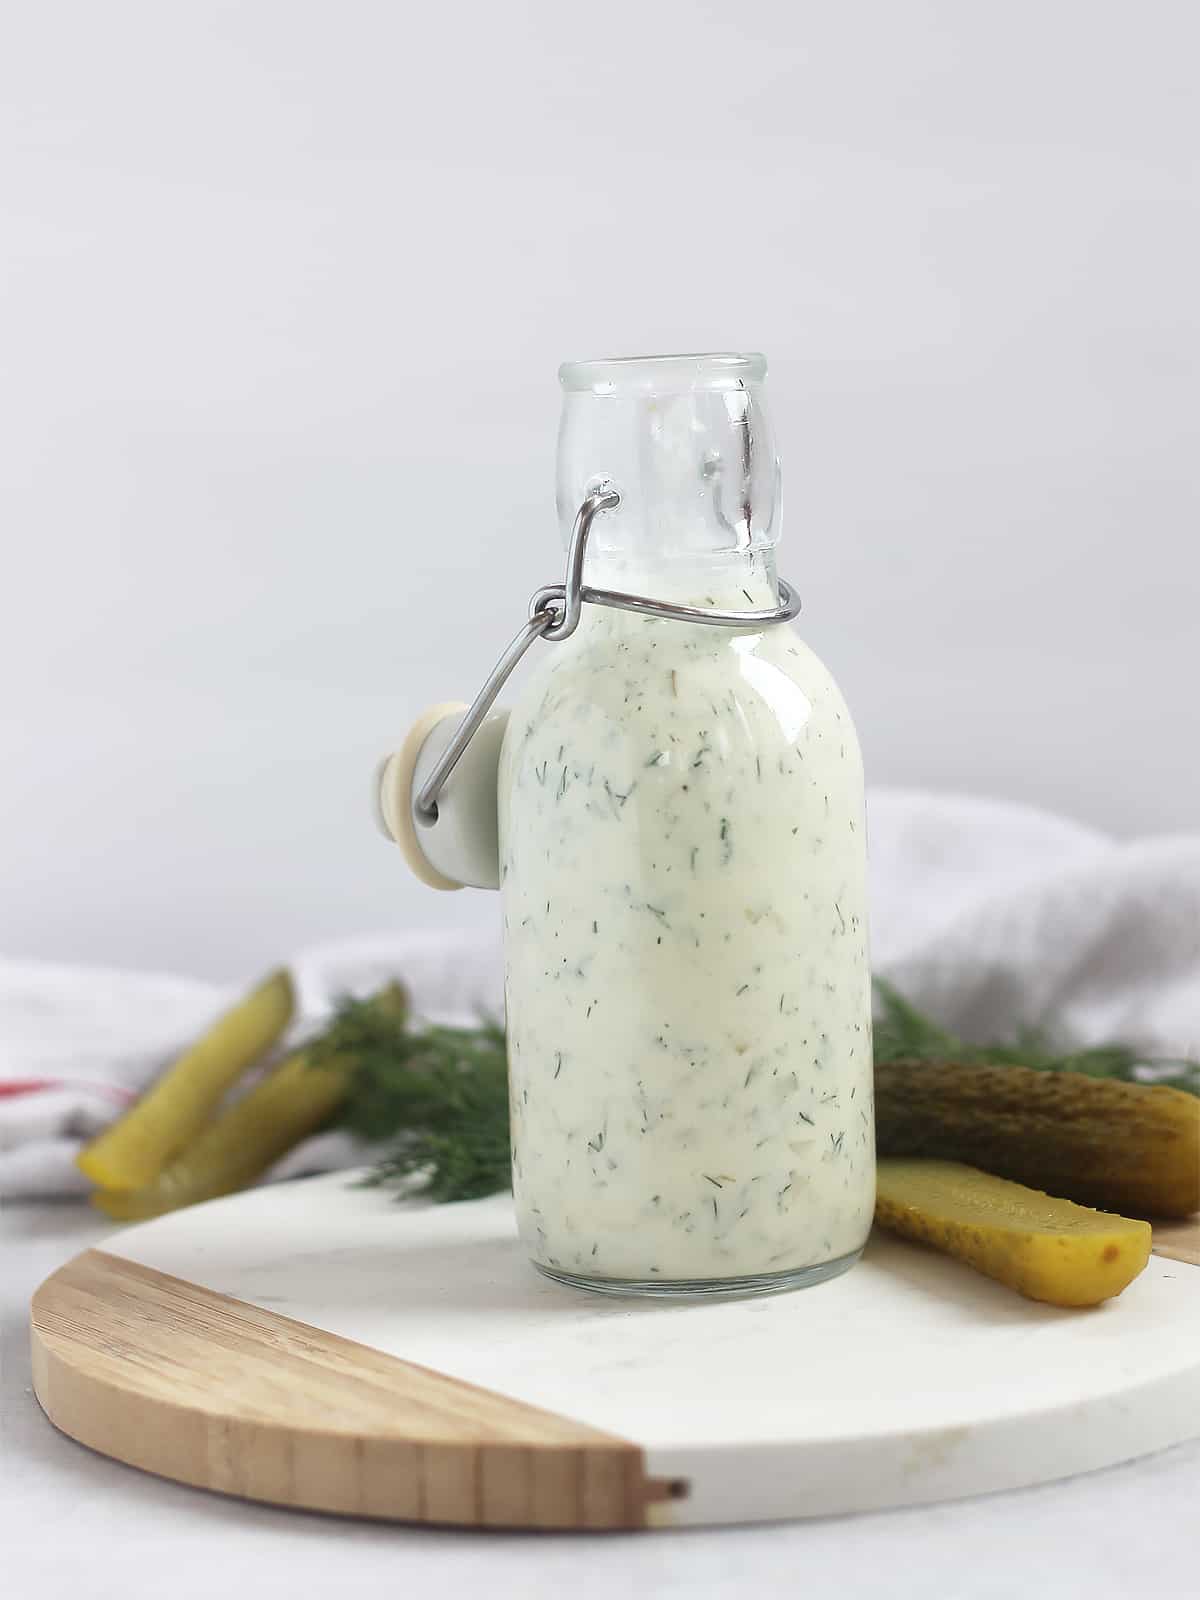 A bottle of creamy dill pickle dressing on a wooden chopping board next to fresh ingredients.